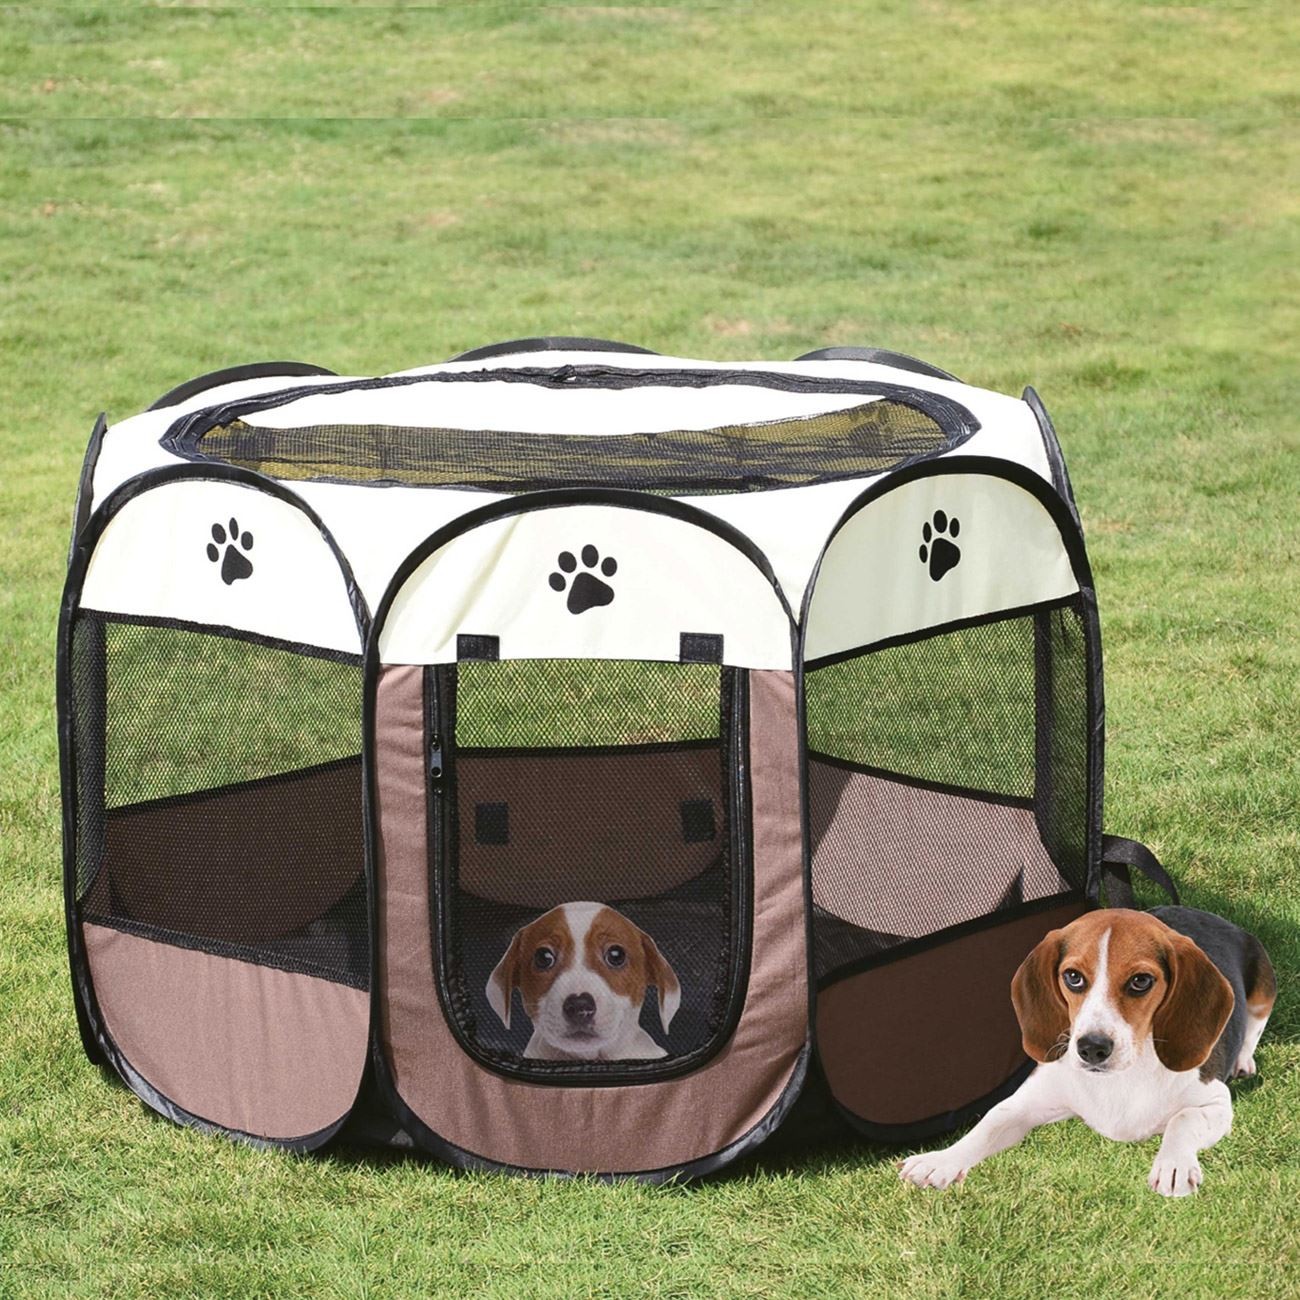 LIVOWALNY Portable Pet Playpen Foldable Dog Playpen Exercise Kennel Tent for Puppy Dog Cat Rabbit Great for Indoor Outdoor Travel Use with Free Carrying Case 